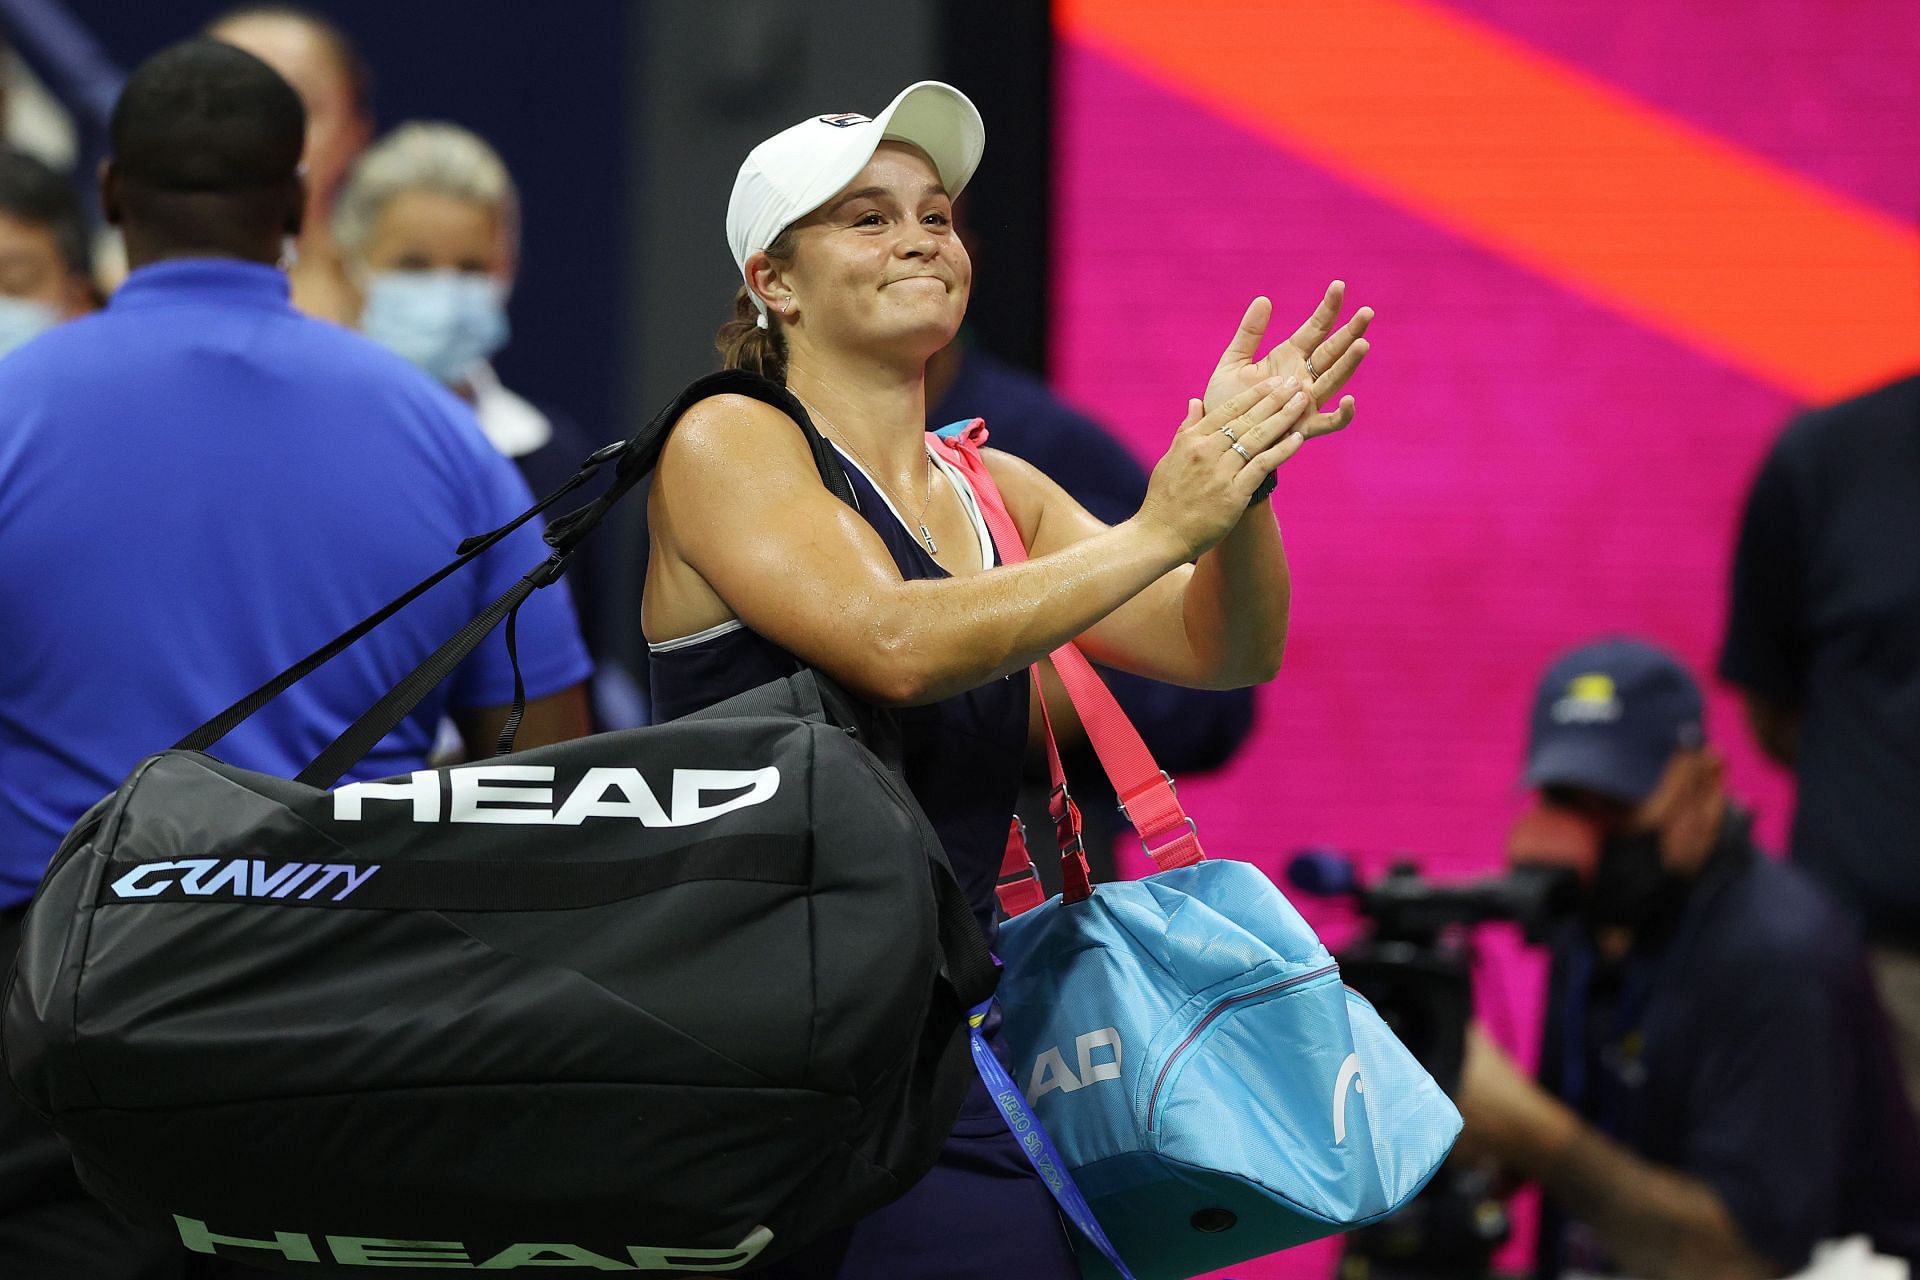 Ashleigh Barty at the 2021 US Open